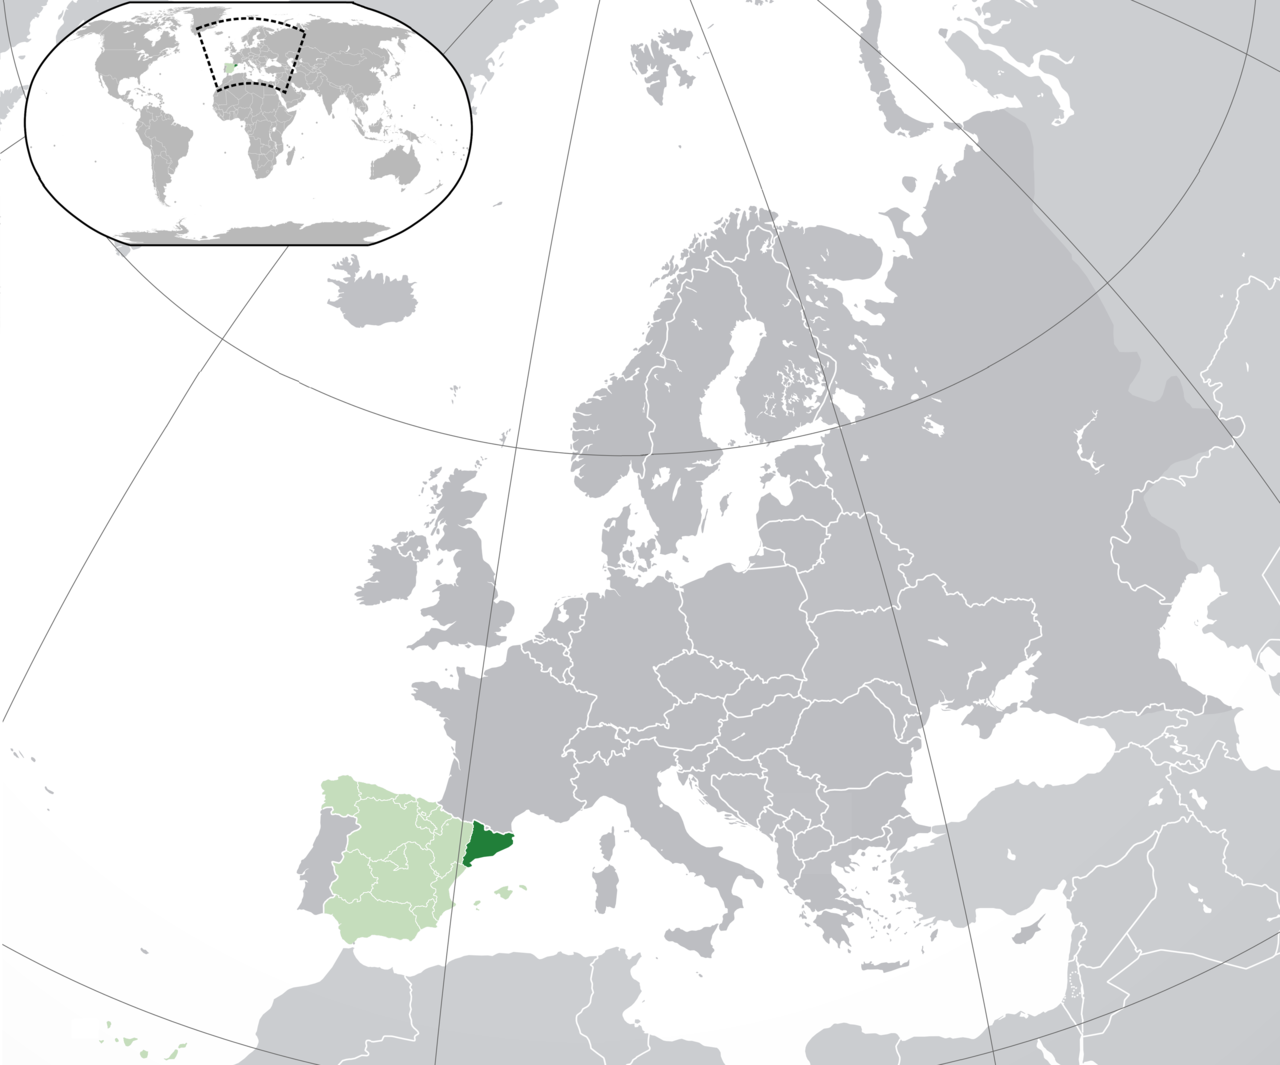 Map of Spain and Catalonia in Europe